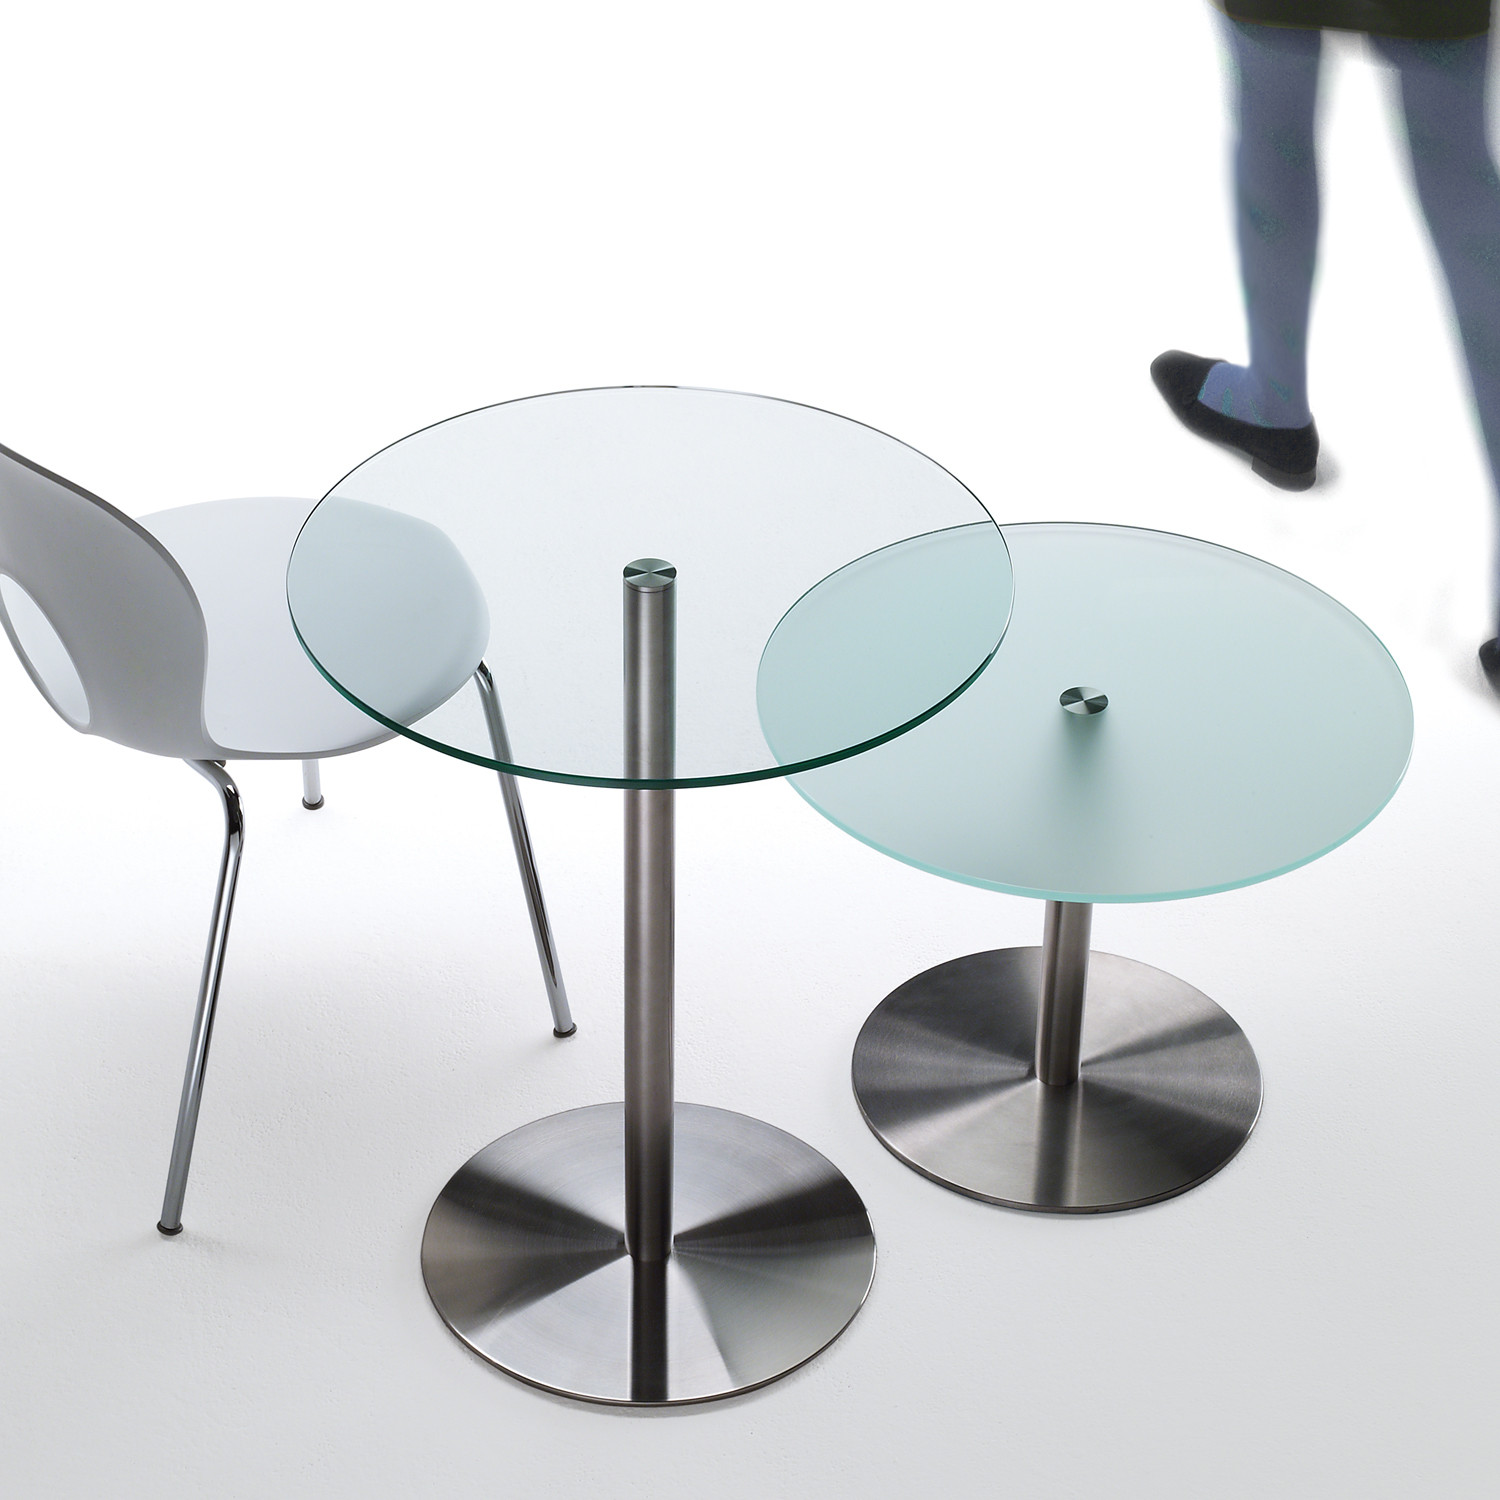 Desco Coffee Tables by Rexite